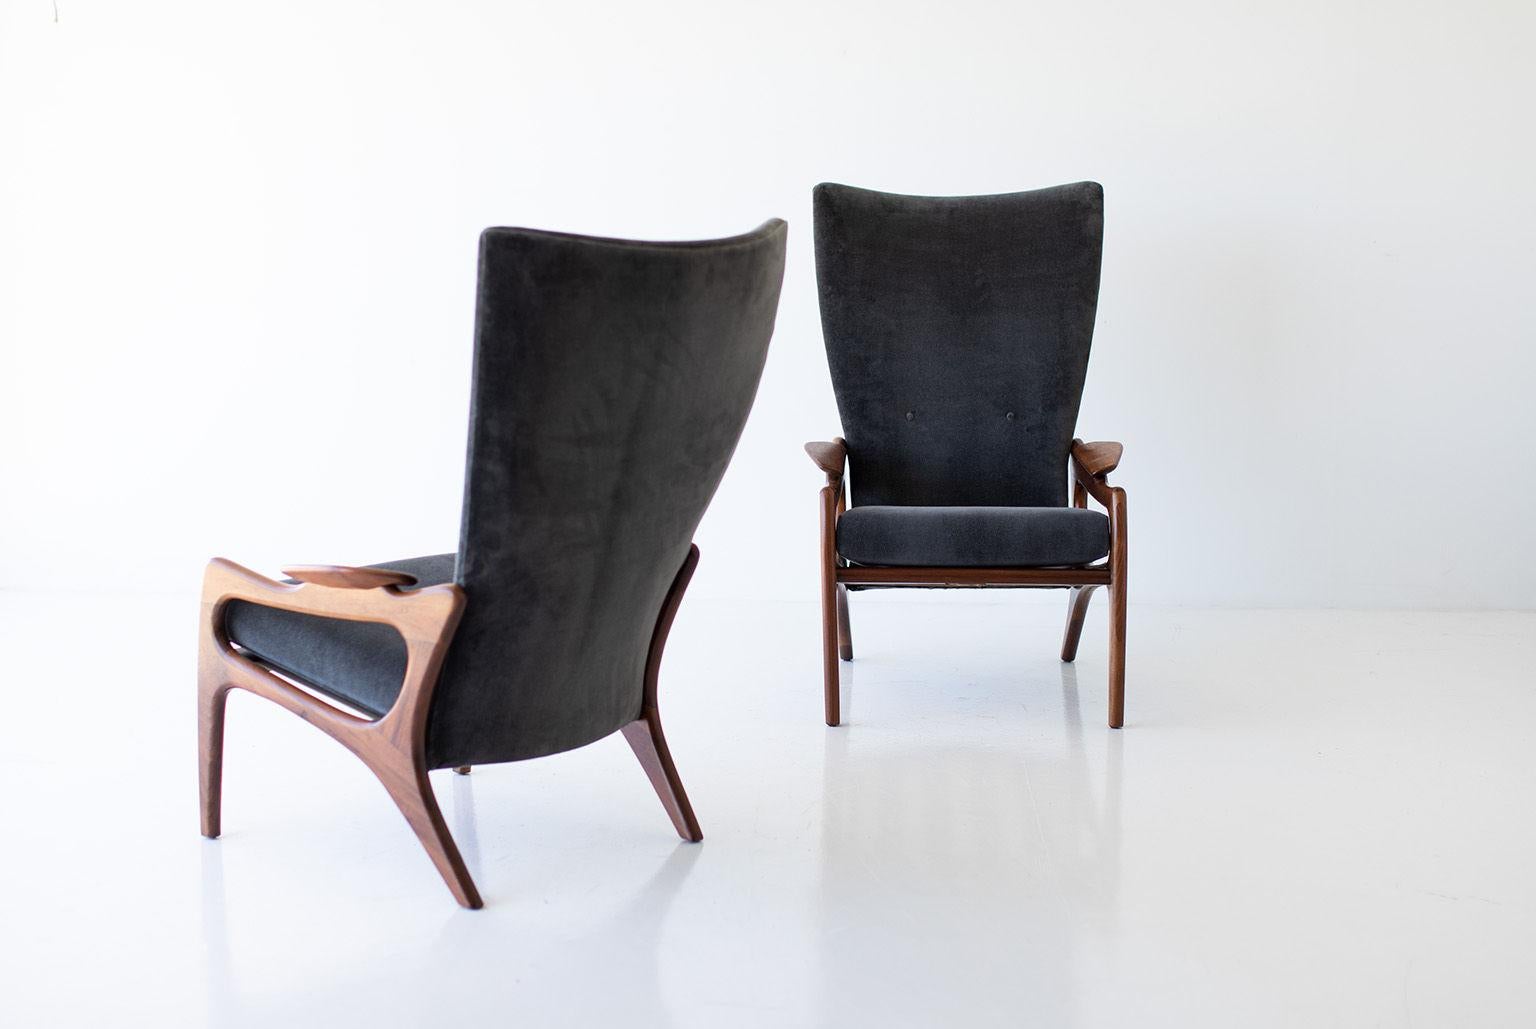 Designer: Adrian Pearsall.

Manufacturer: Craft Associates Inc.
Period or model: Mid-Century Modern.
Specs: Walnut, Velvet.

Condition:

These Adrian Pearsall high back lounge chairs for Craft Associates Inc. are in very good condition. The